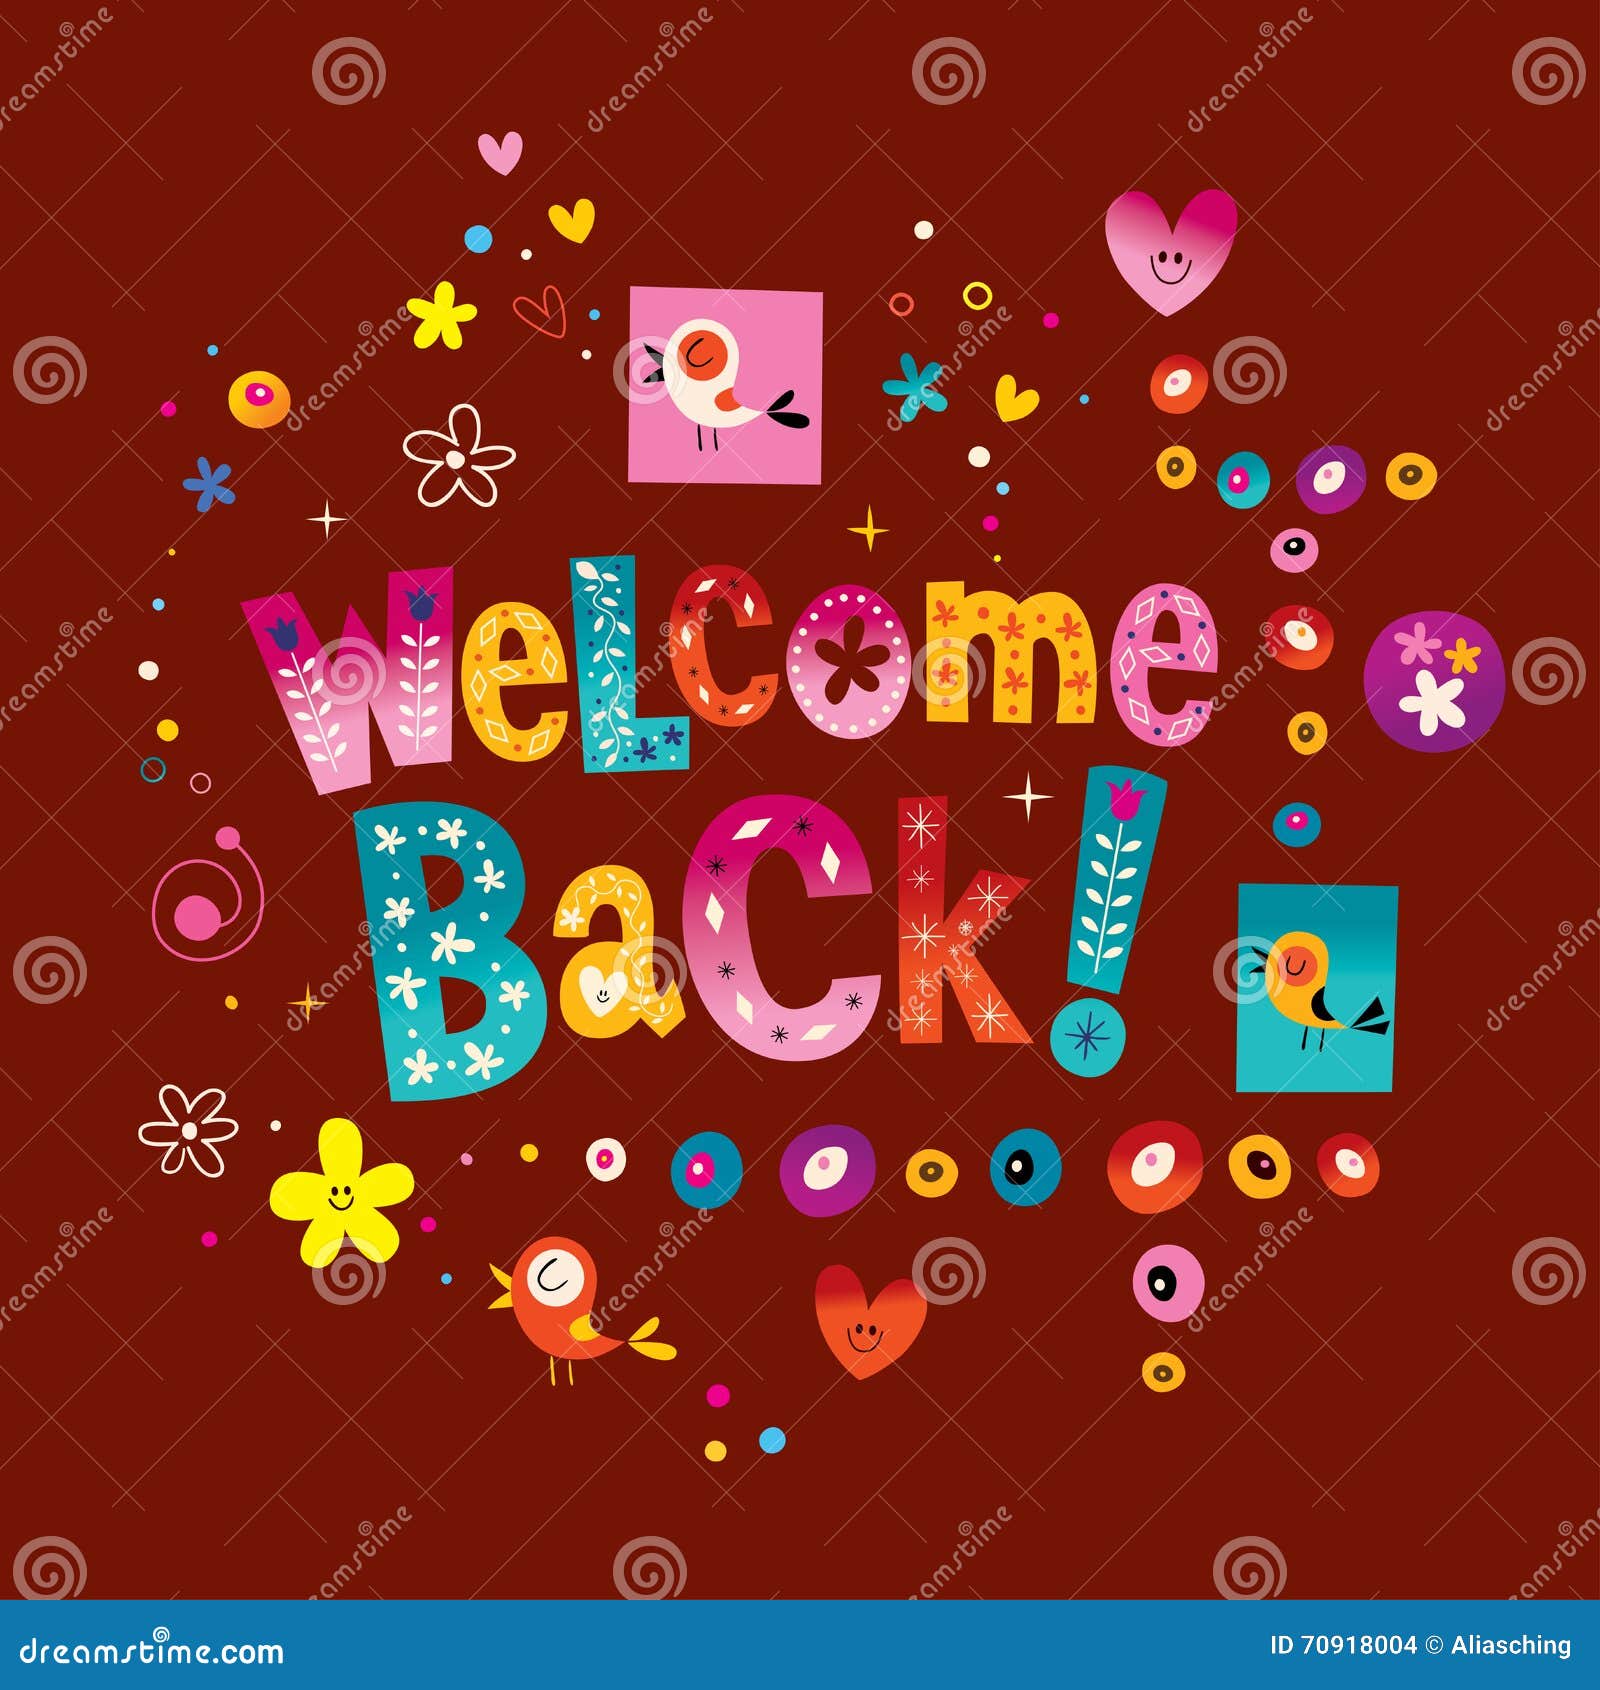 Welcome Back Images – Browse 4,376 Stock Photos, Vectors, and Video